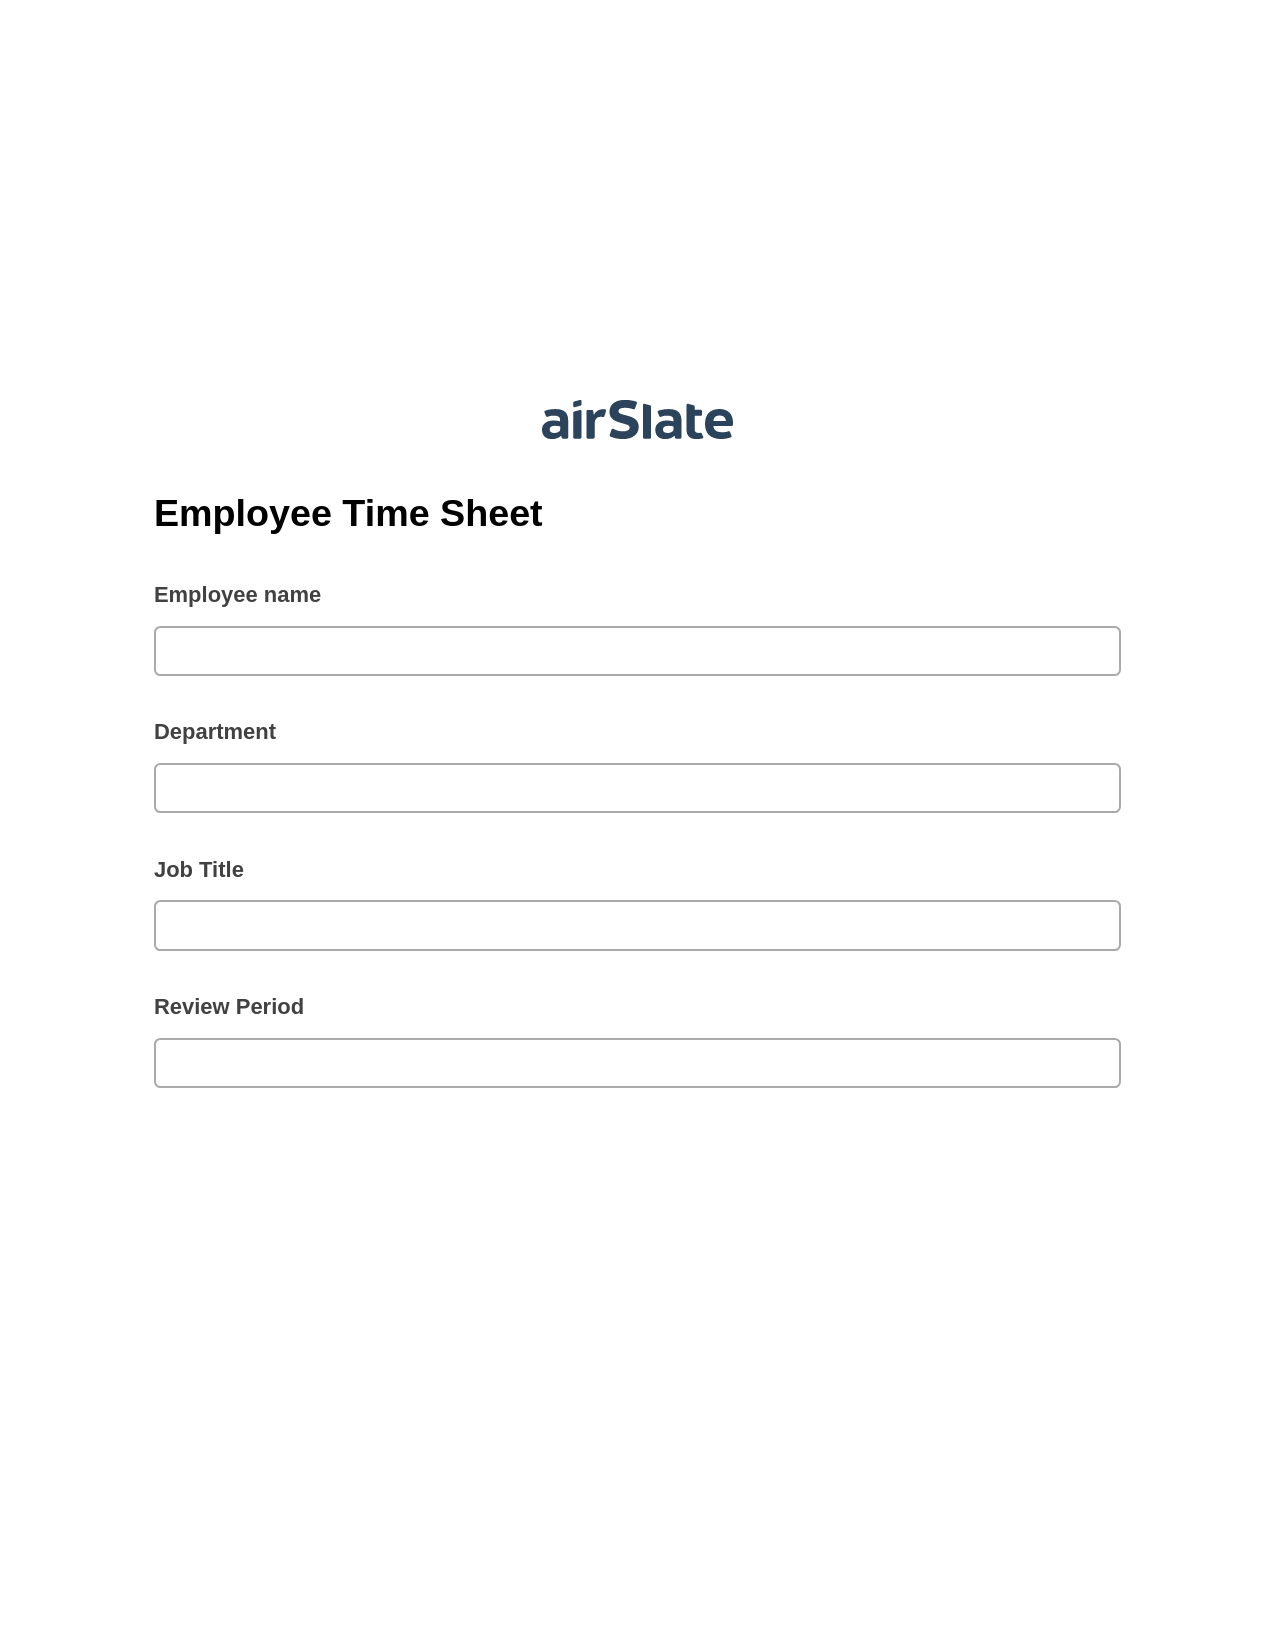 Employee Time Sheet Pre-fill from another Slate Bot, Update Audit Trail Bot, Post-finish Document Bot